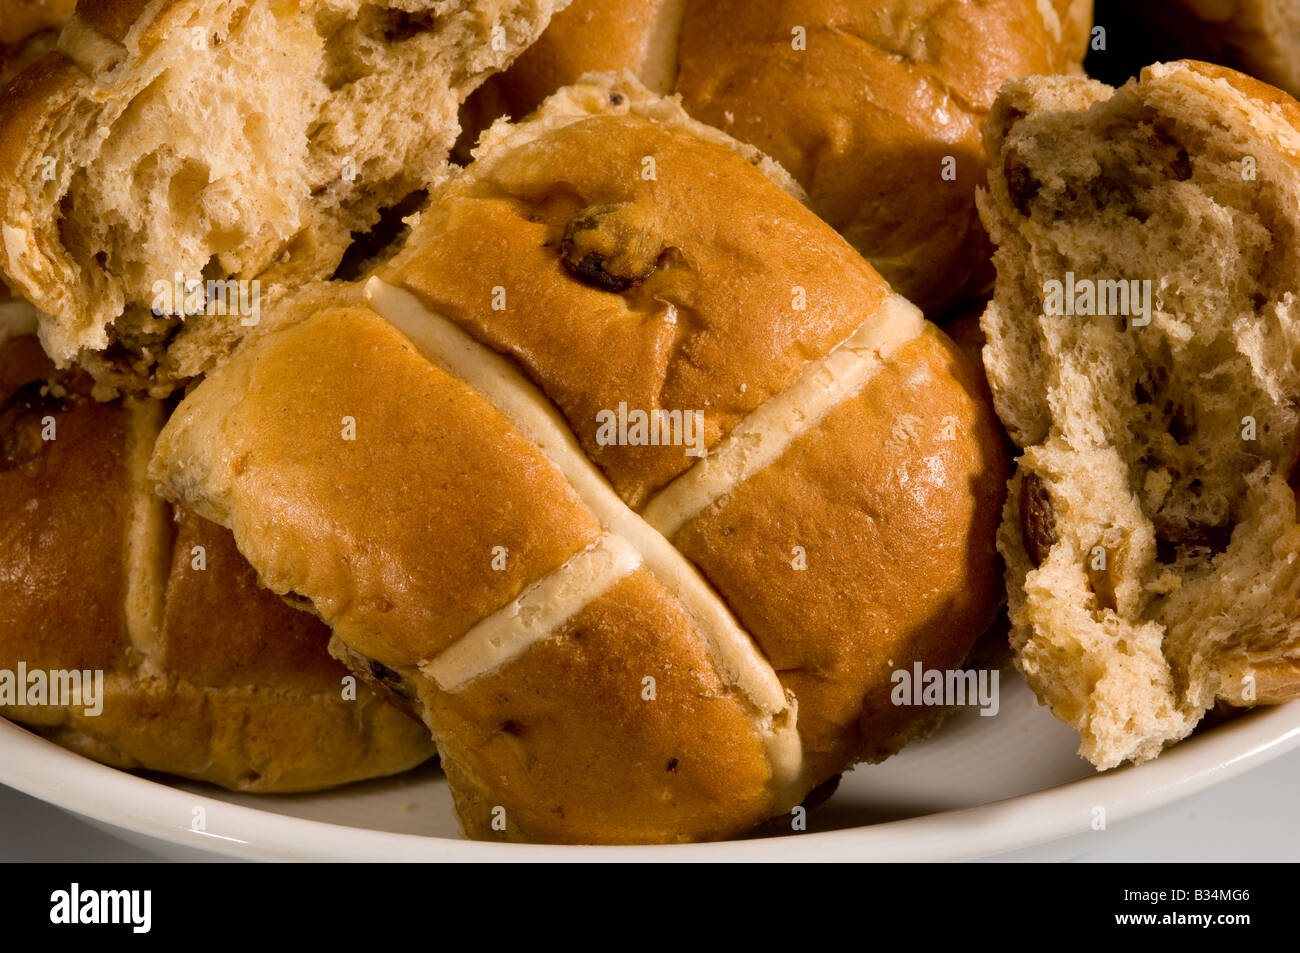 Closeup of commercially baked Hot cross buns on a white plate with one of the buns torn open to expose the dried fruit inside. UK Stock Photo